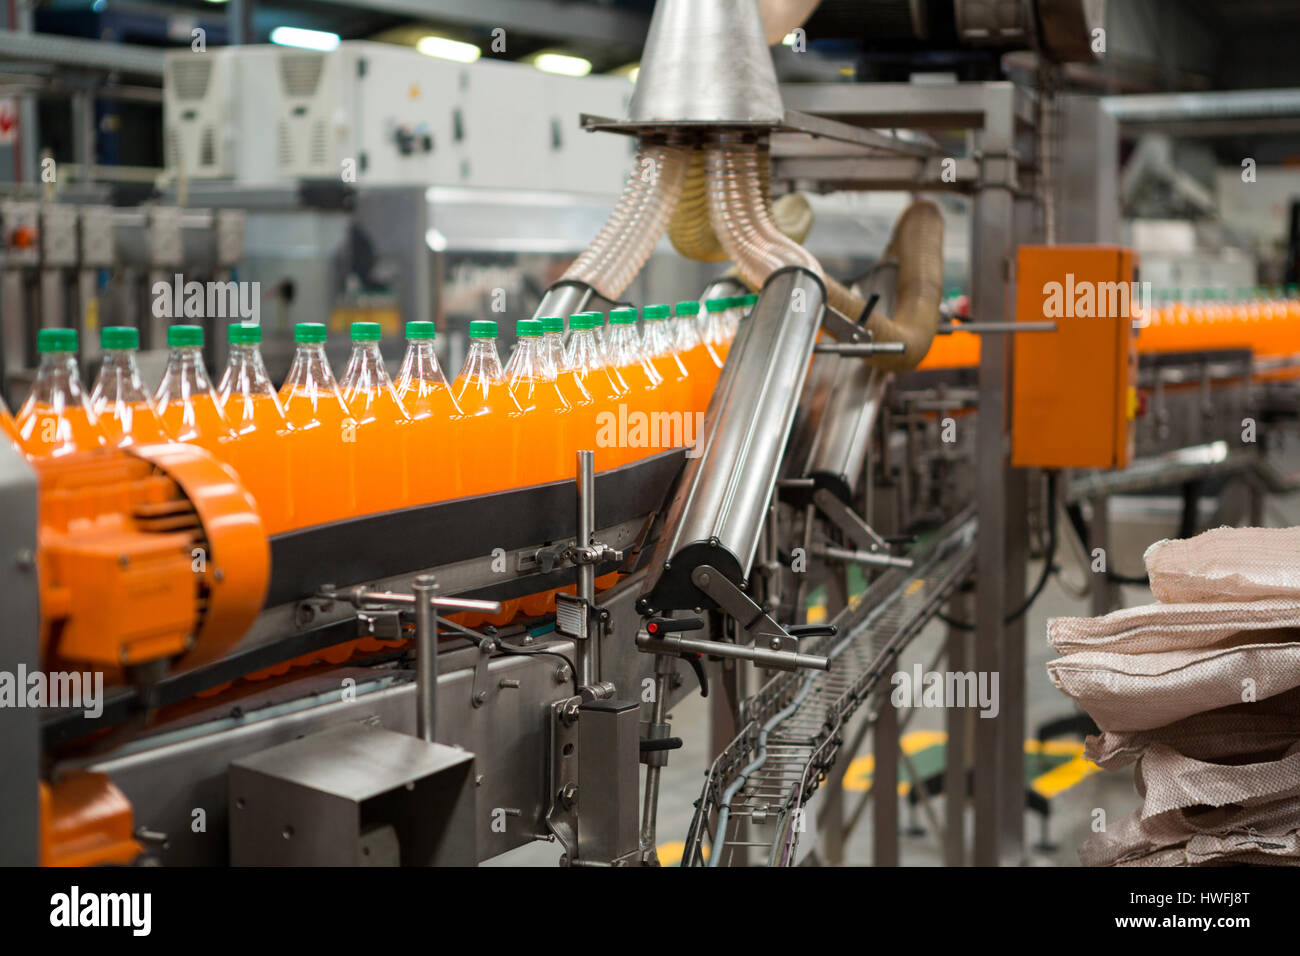 Packaging process of orange cold drink bottles in factory Stock Photo